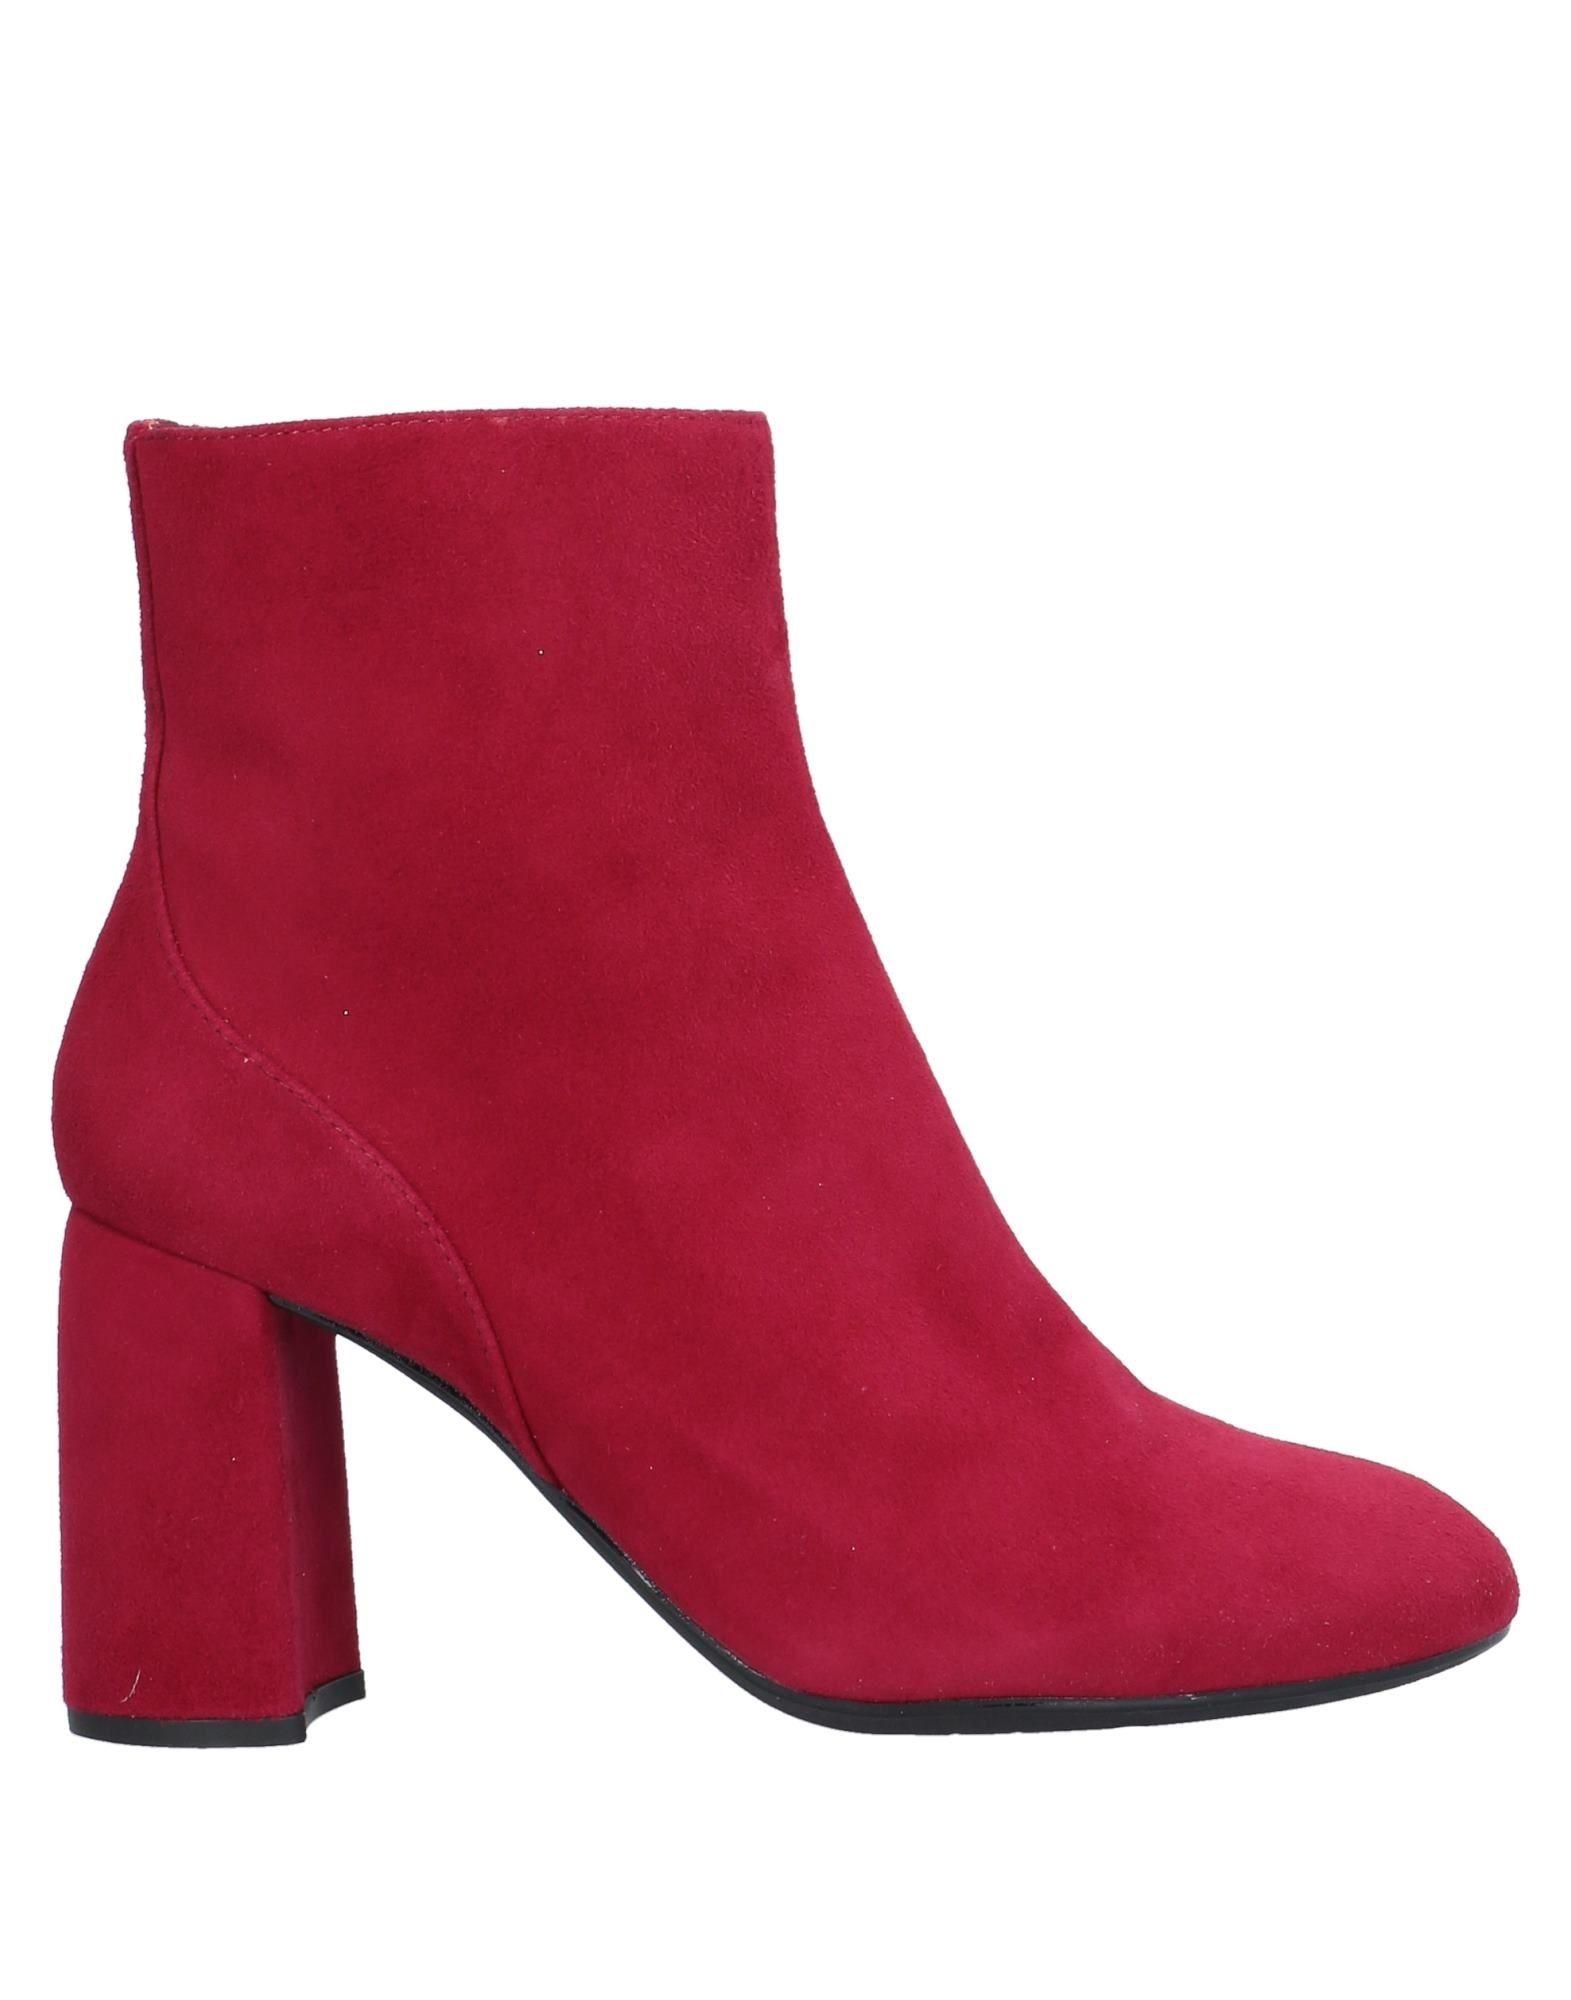 Unisa Suede Ankle Boots in Maroon (Red) - Lyst